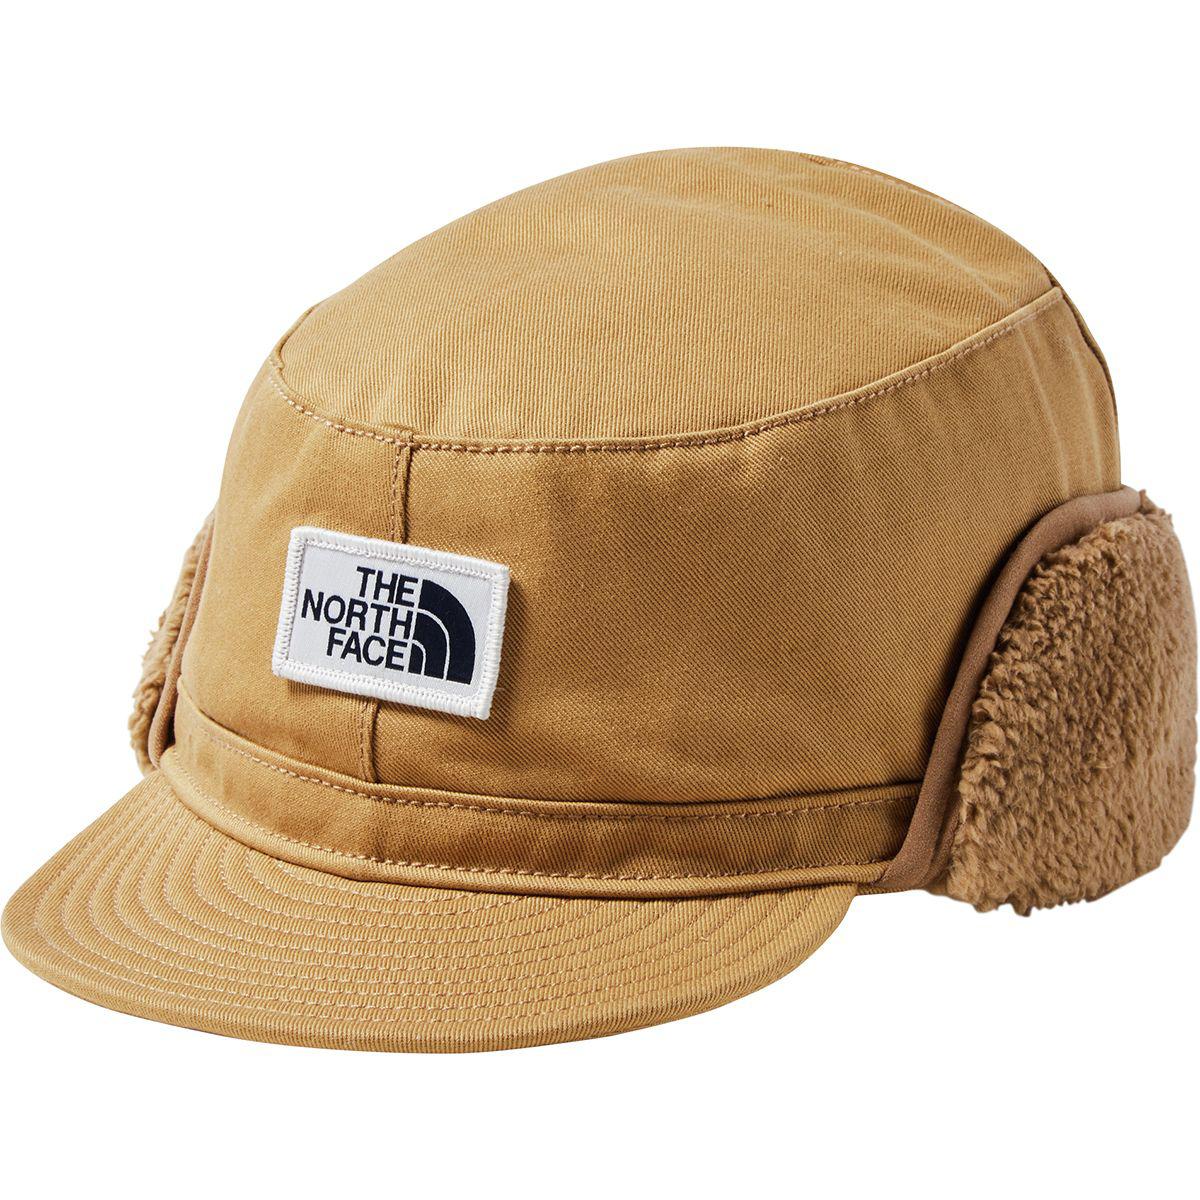 The North Face Cotton Campshire Earflap Cap in Cargo Khaki (Natural) for  Men - Lyst